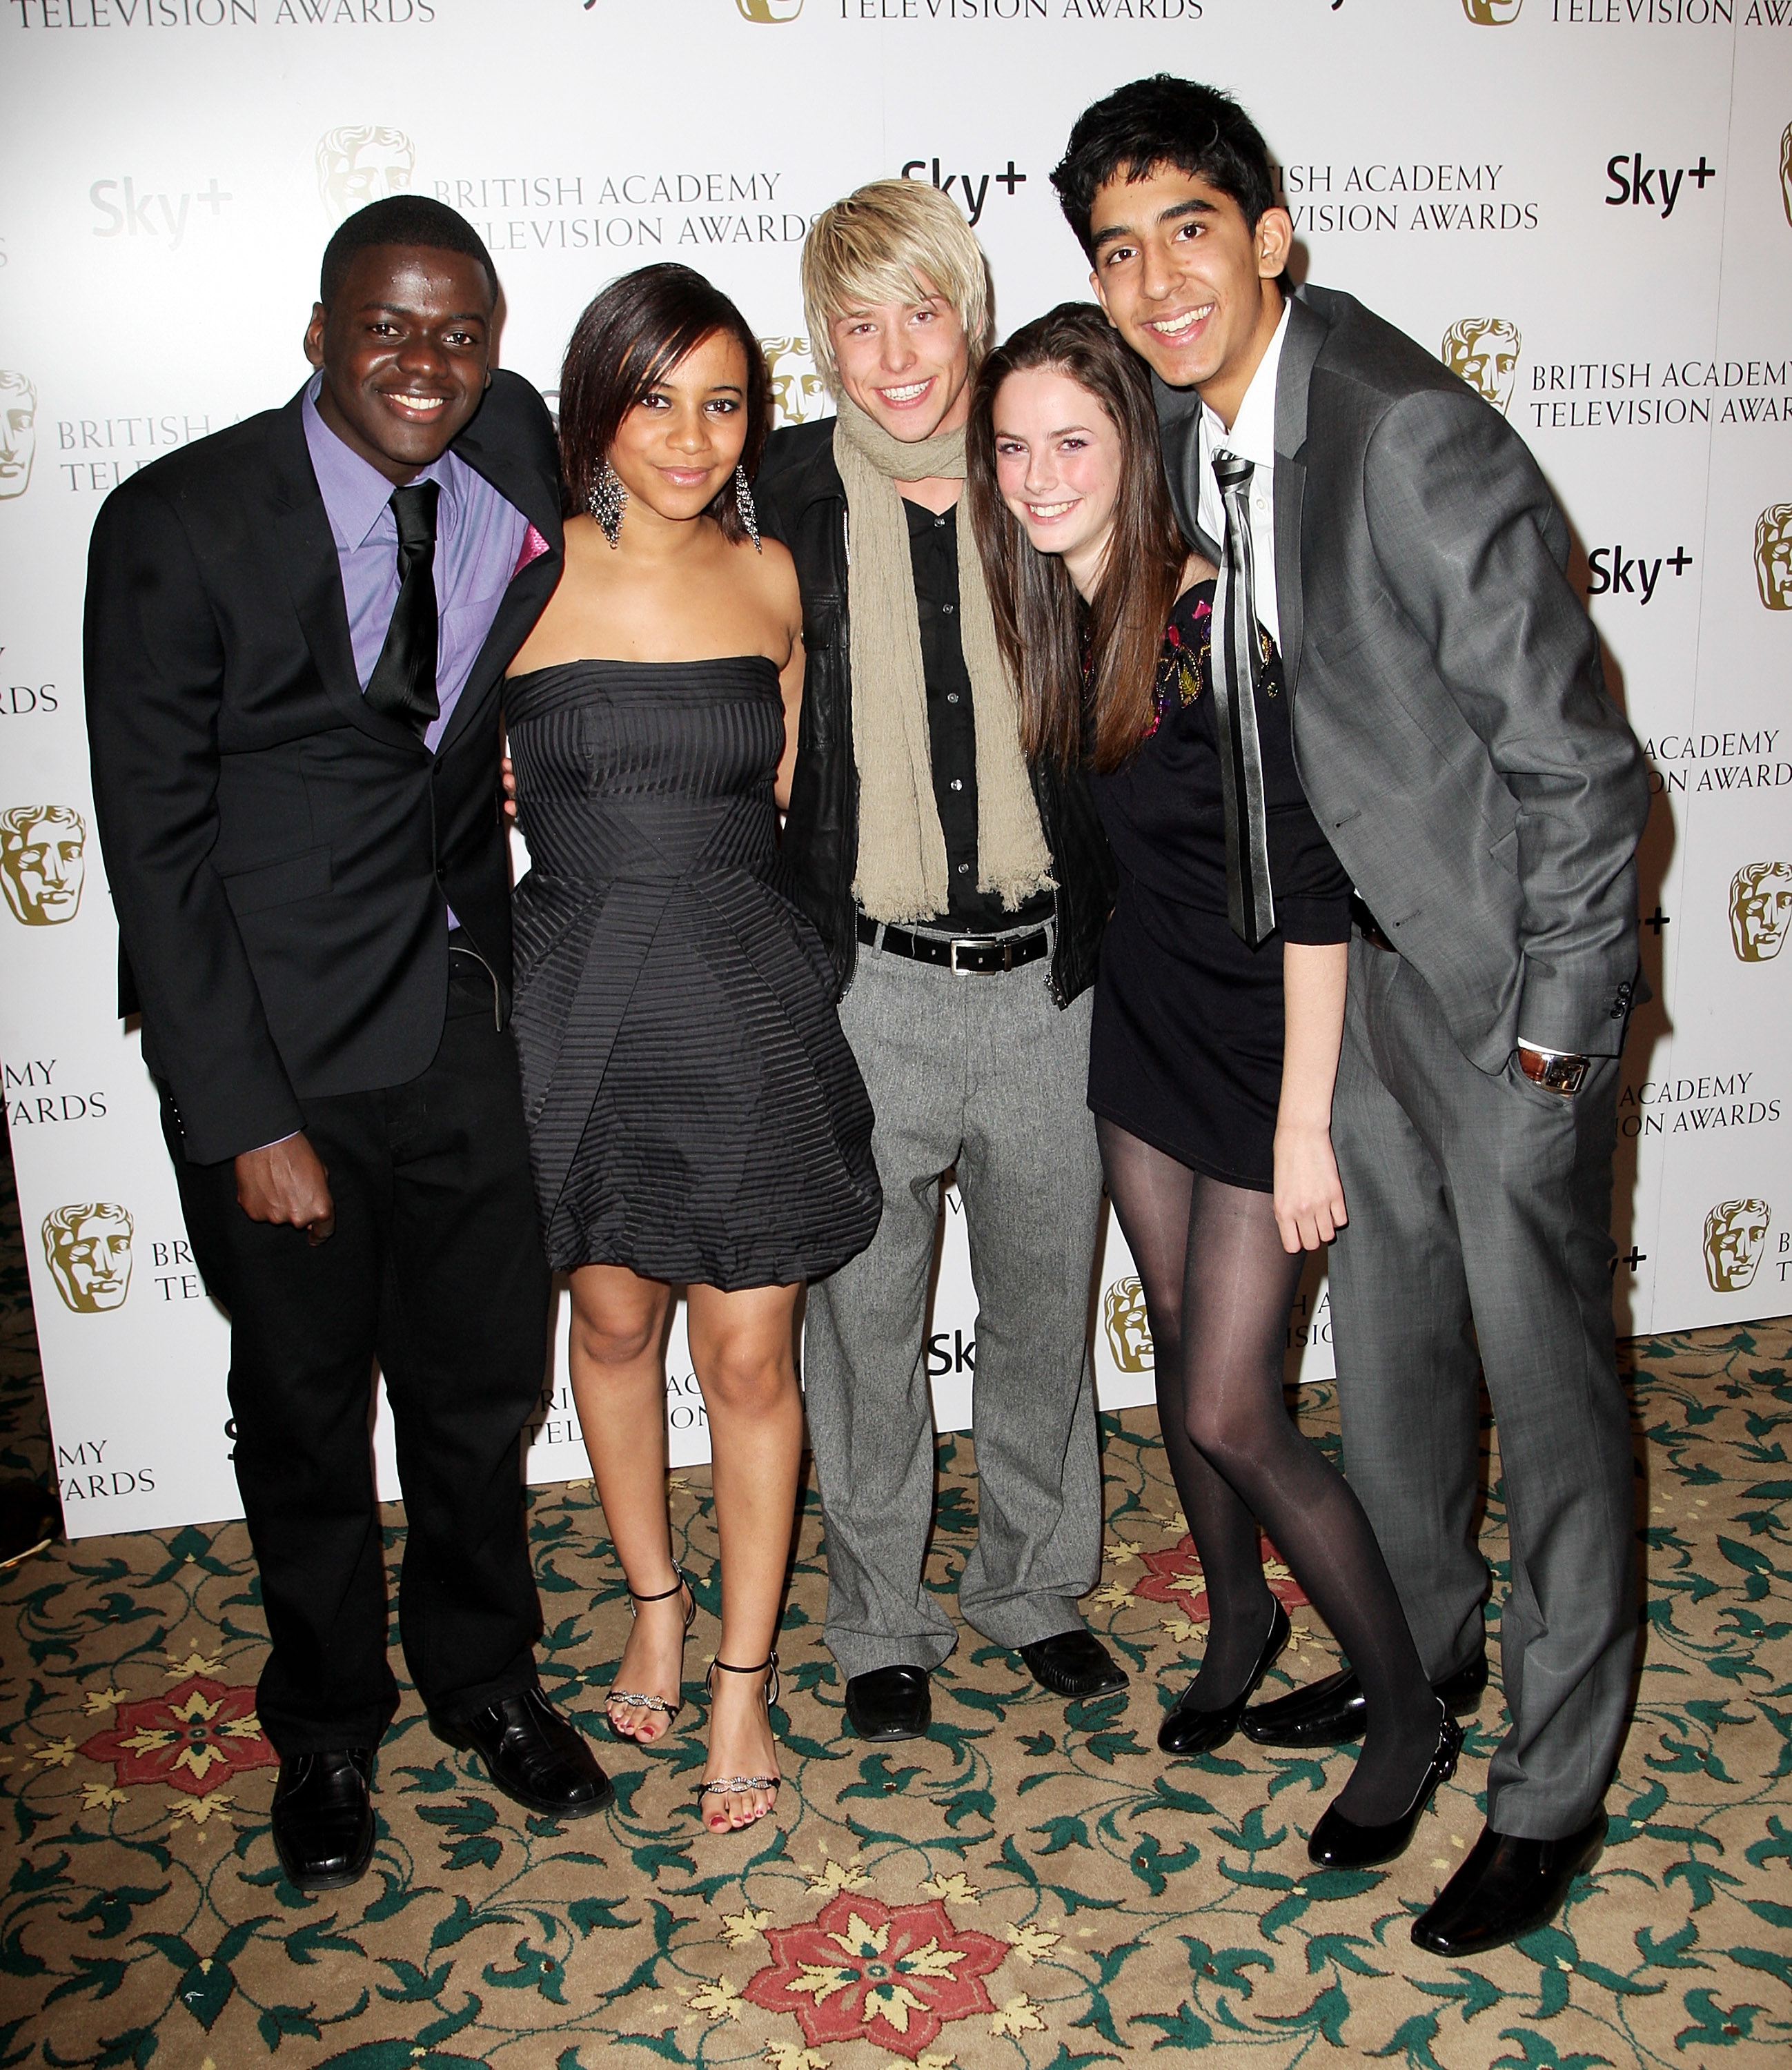 The cast of &quot;Skins&quot; at an event